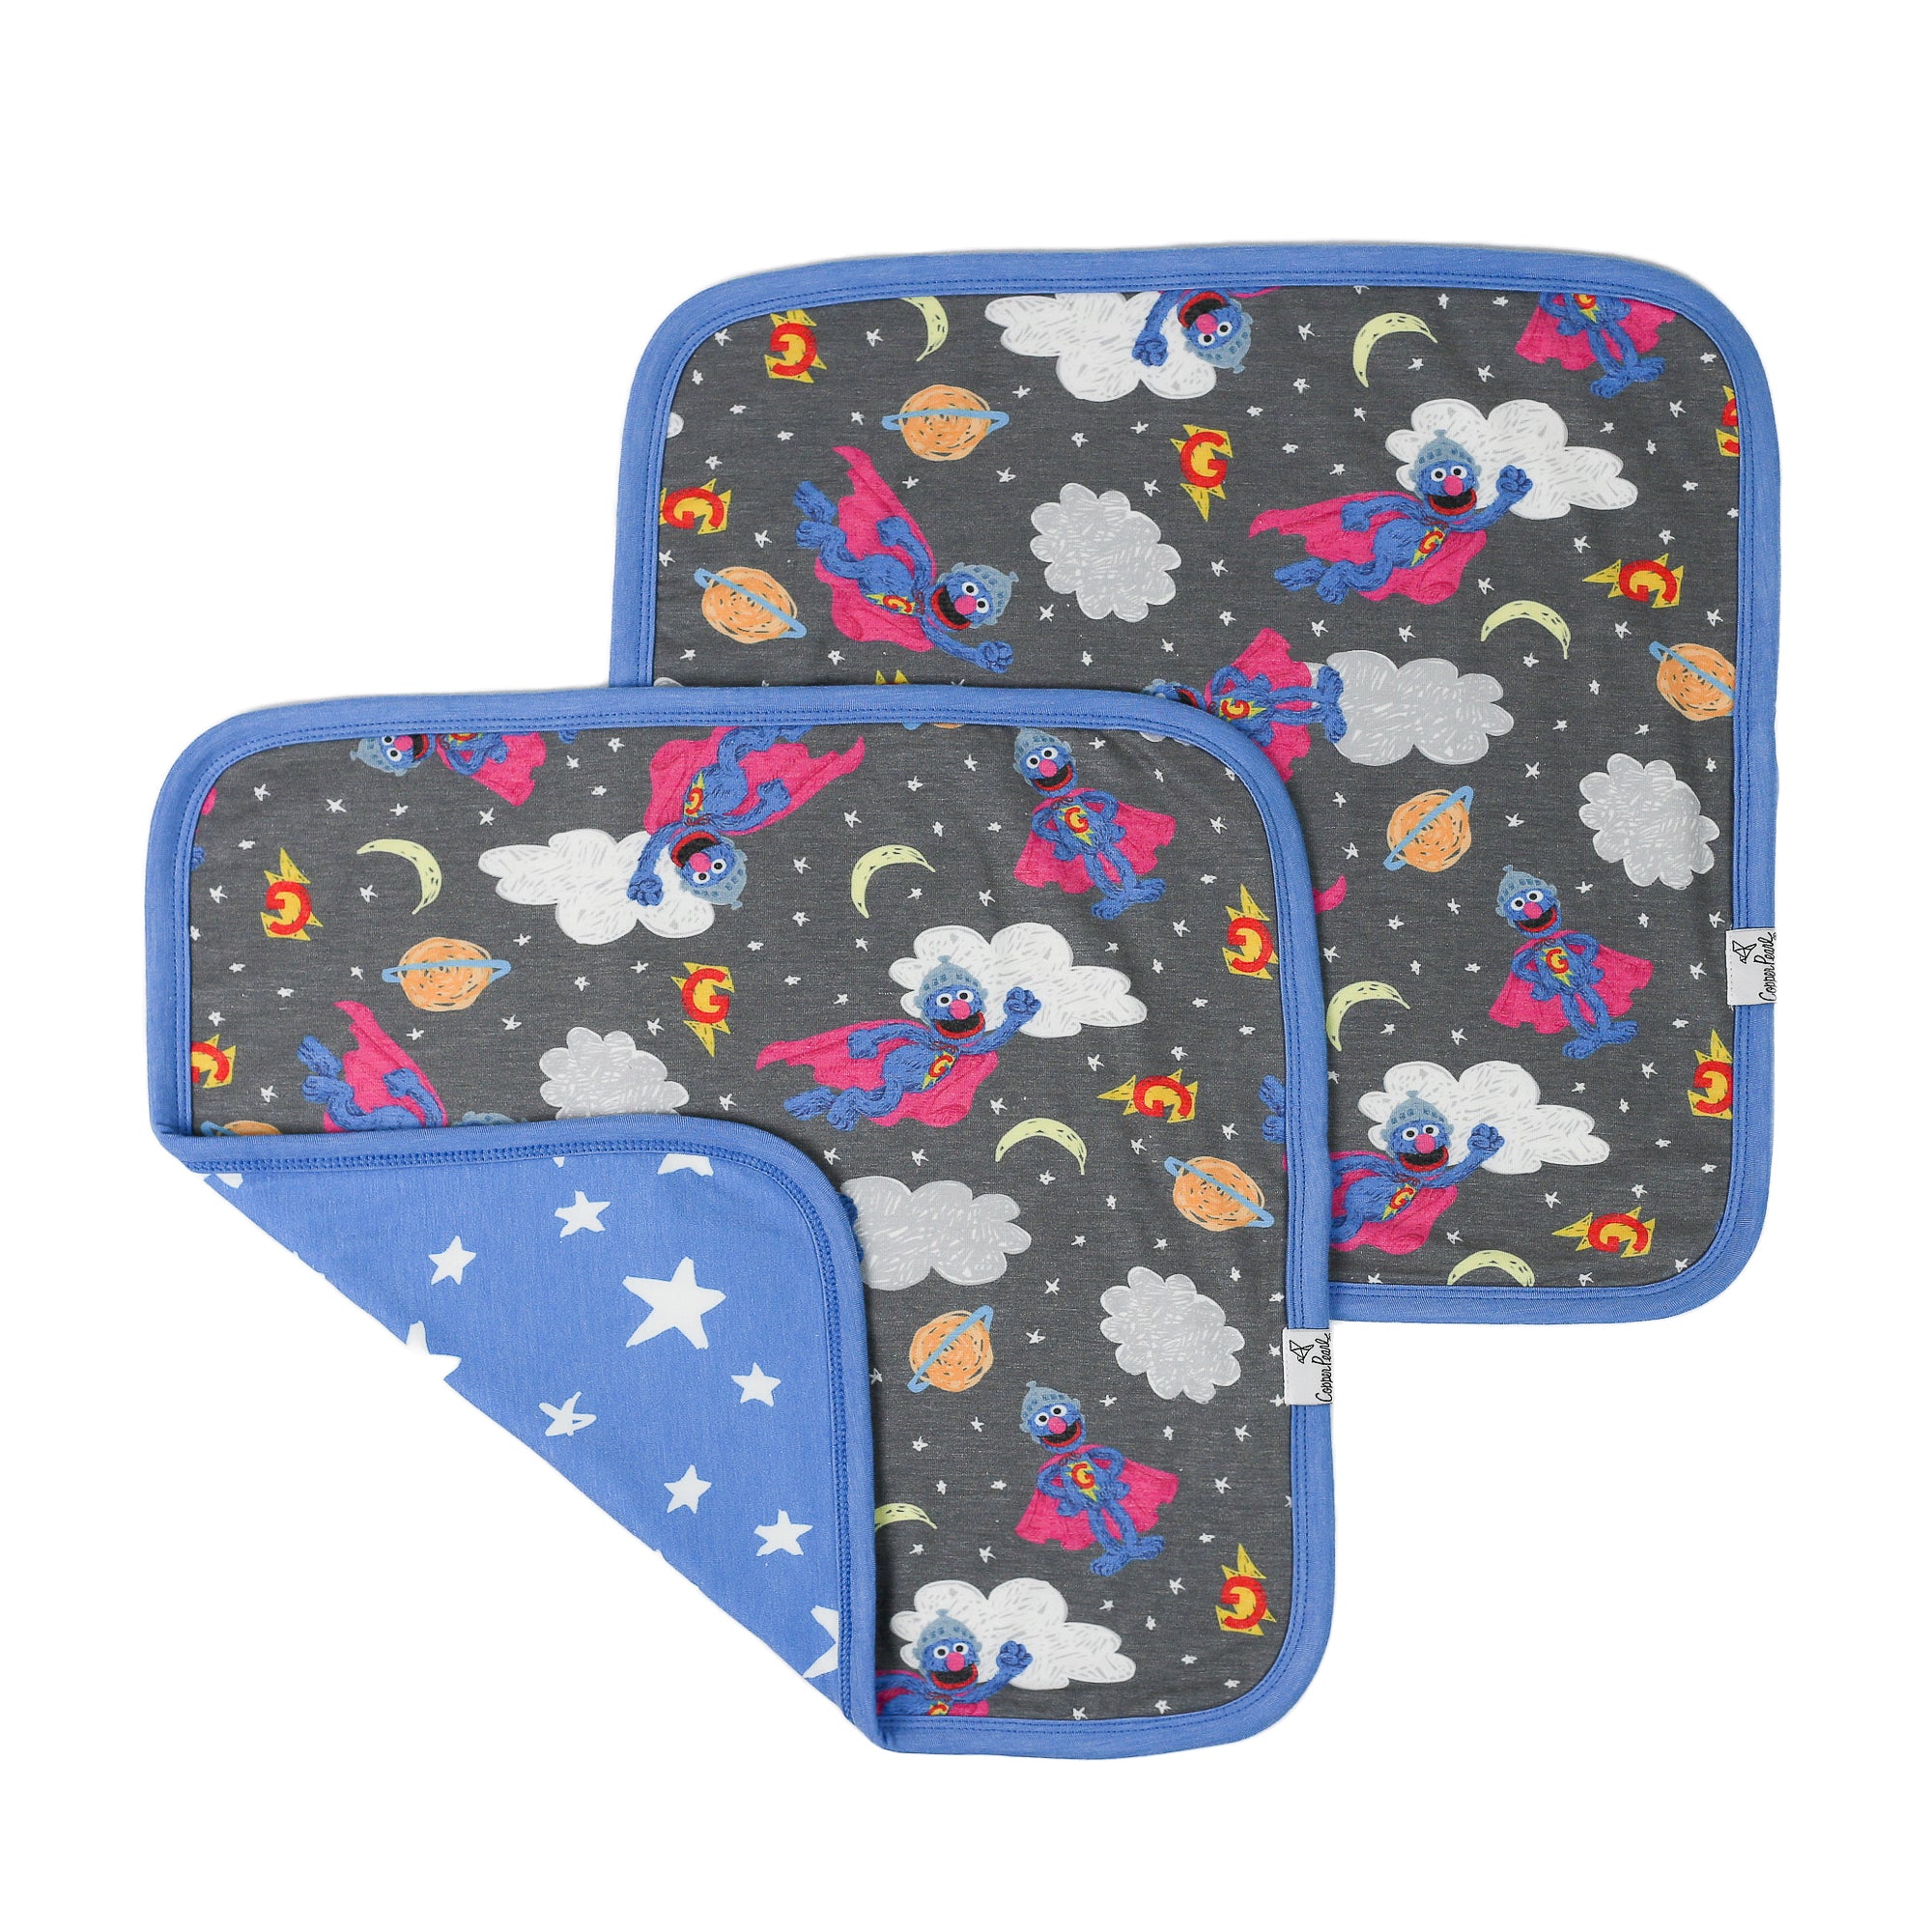 Three-Layer Security Blanket Set - Super Grover